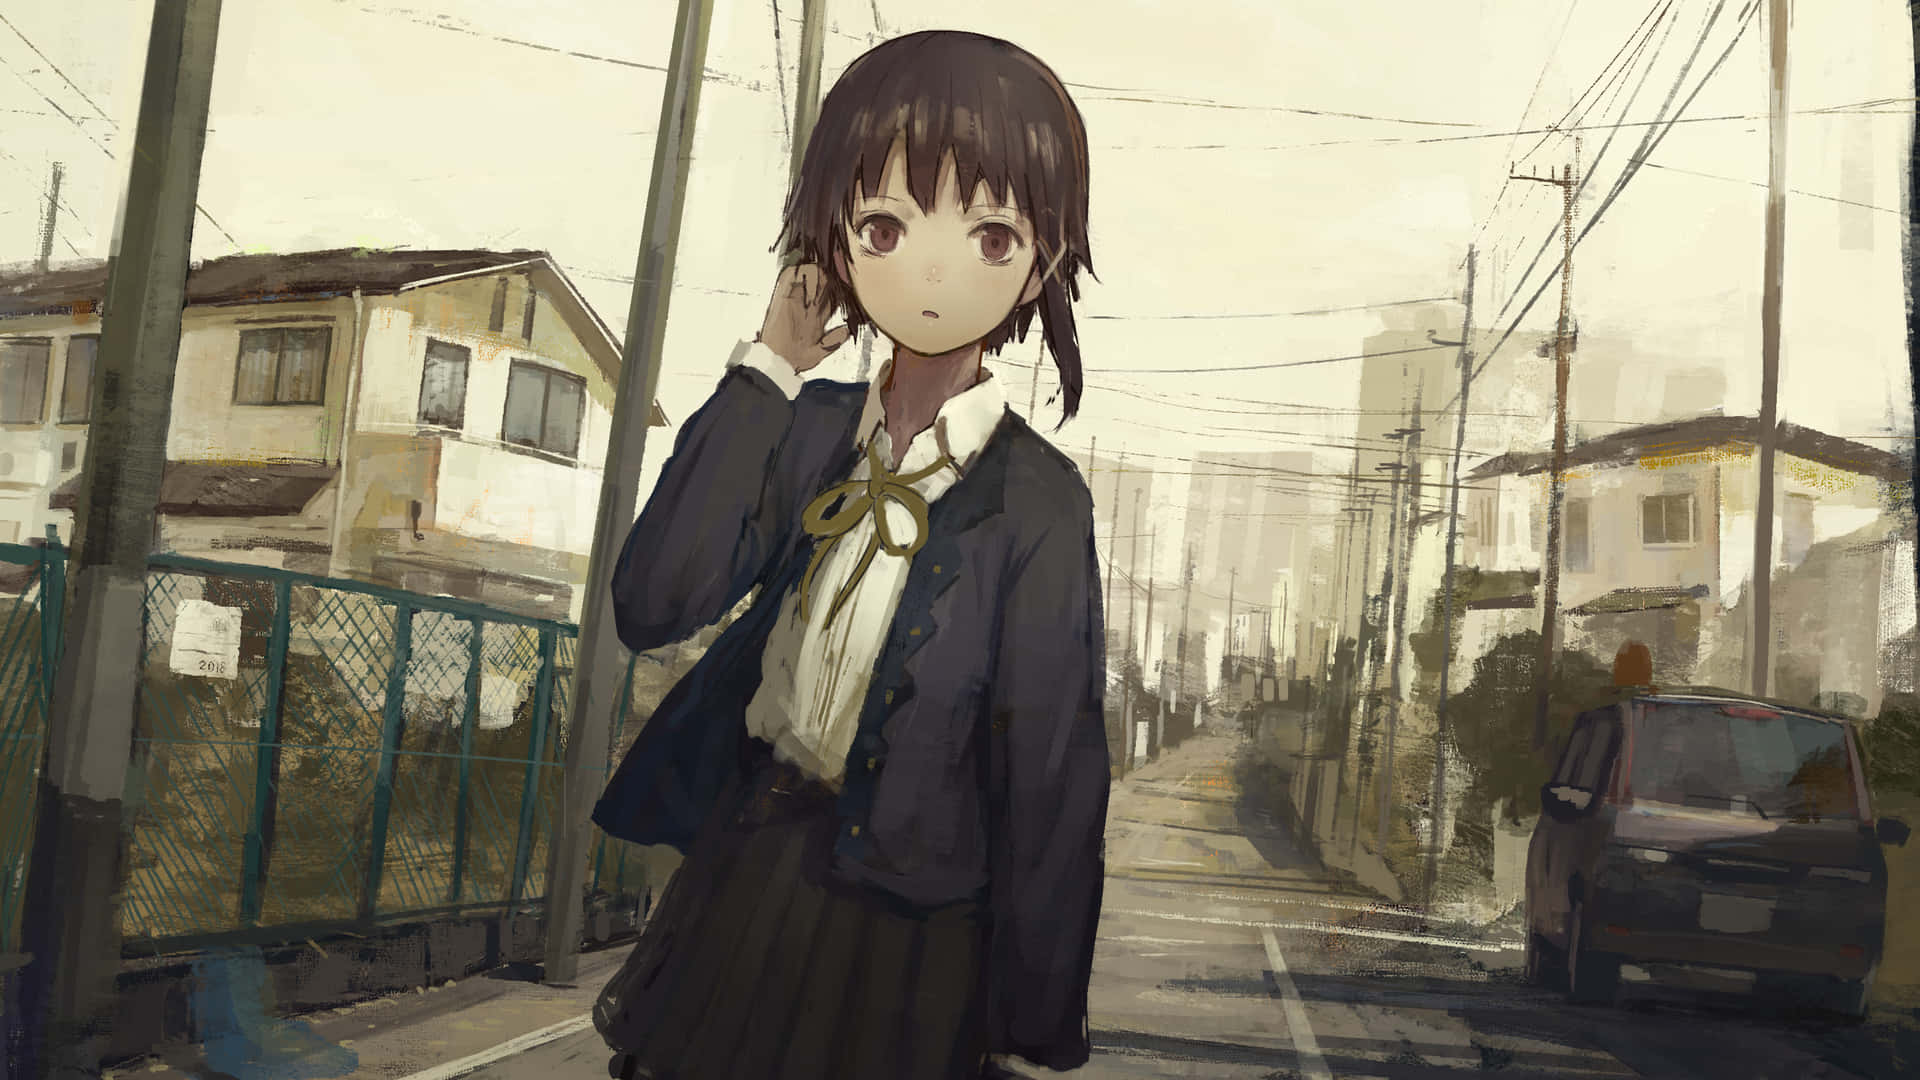 Serial Experiments Lain - “questioning Reality”